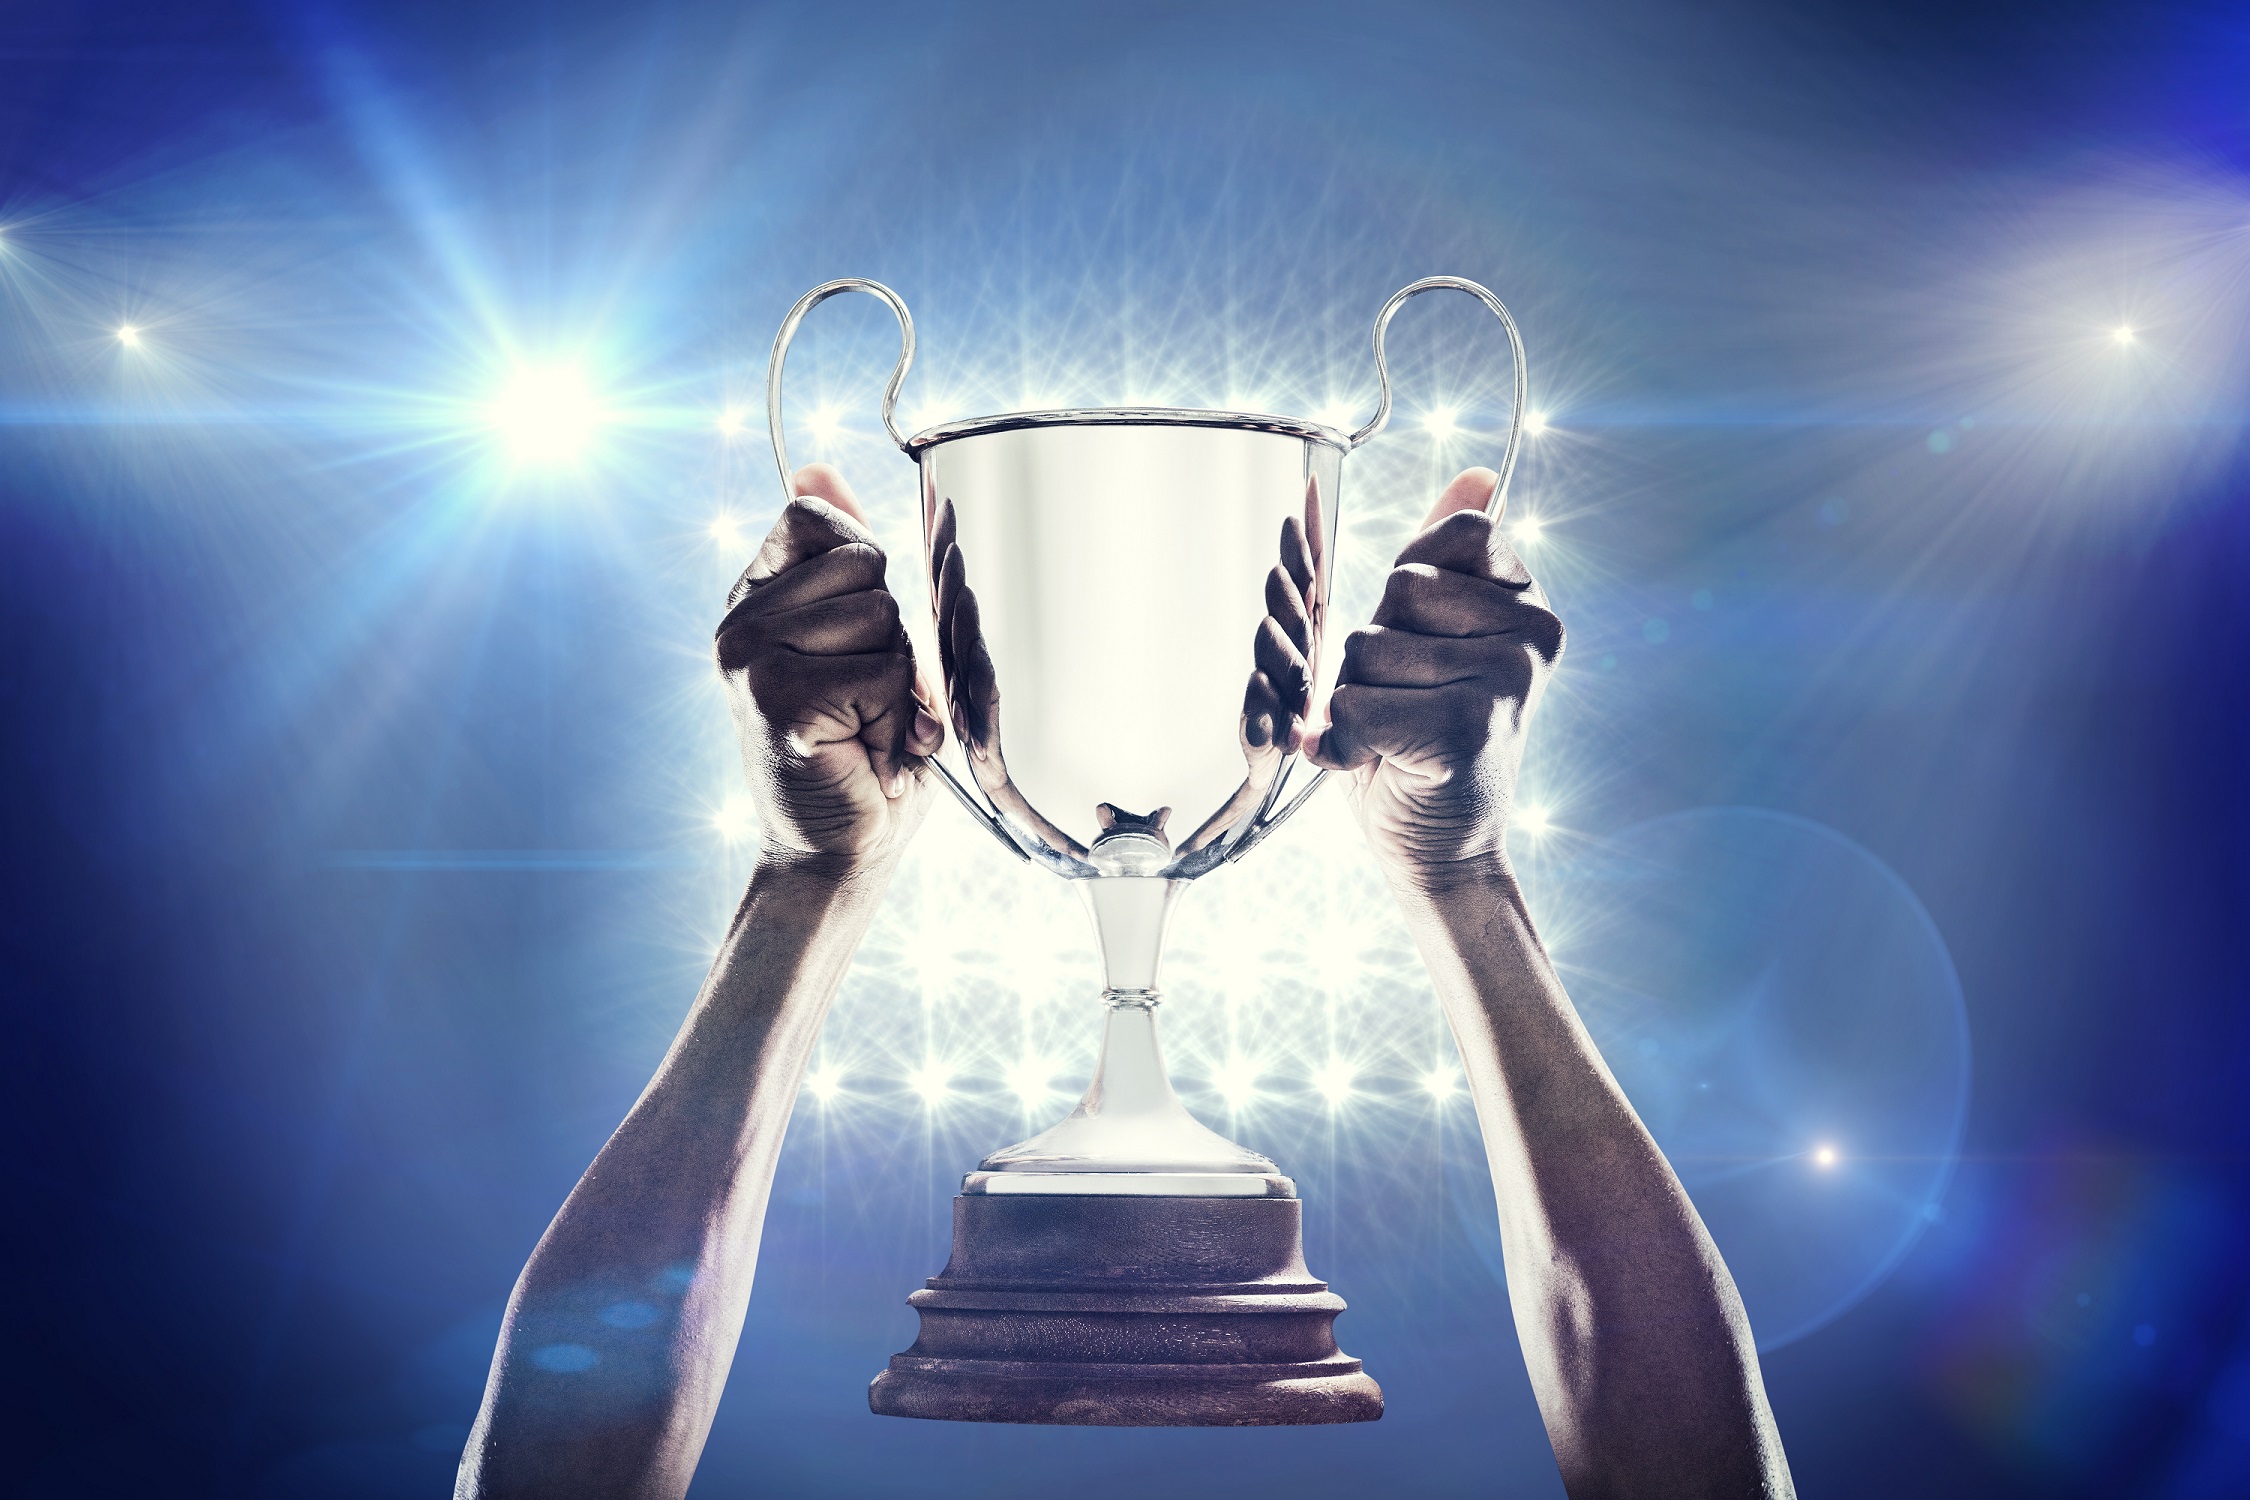 Composite image of cropped hand of athlete holding trophy